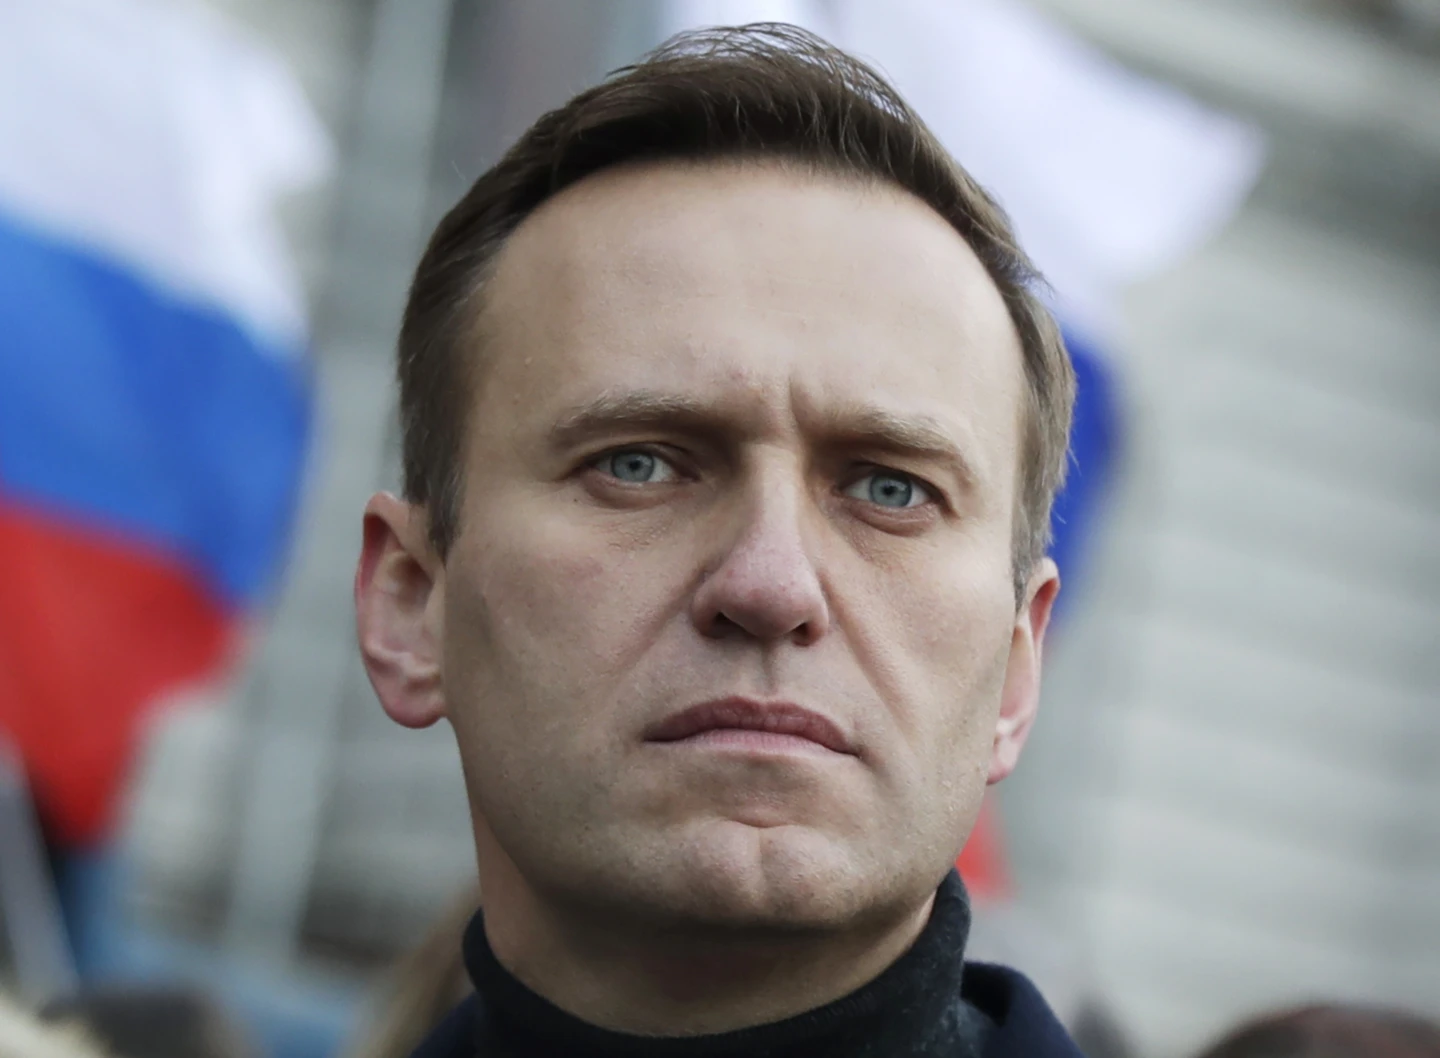 Kremlin Critic Navalny Convicted of Extremism and Sentenced to 19 Years in Prison